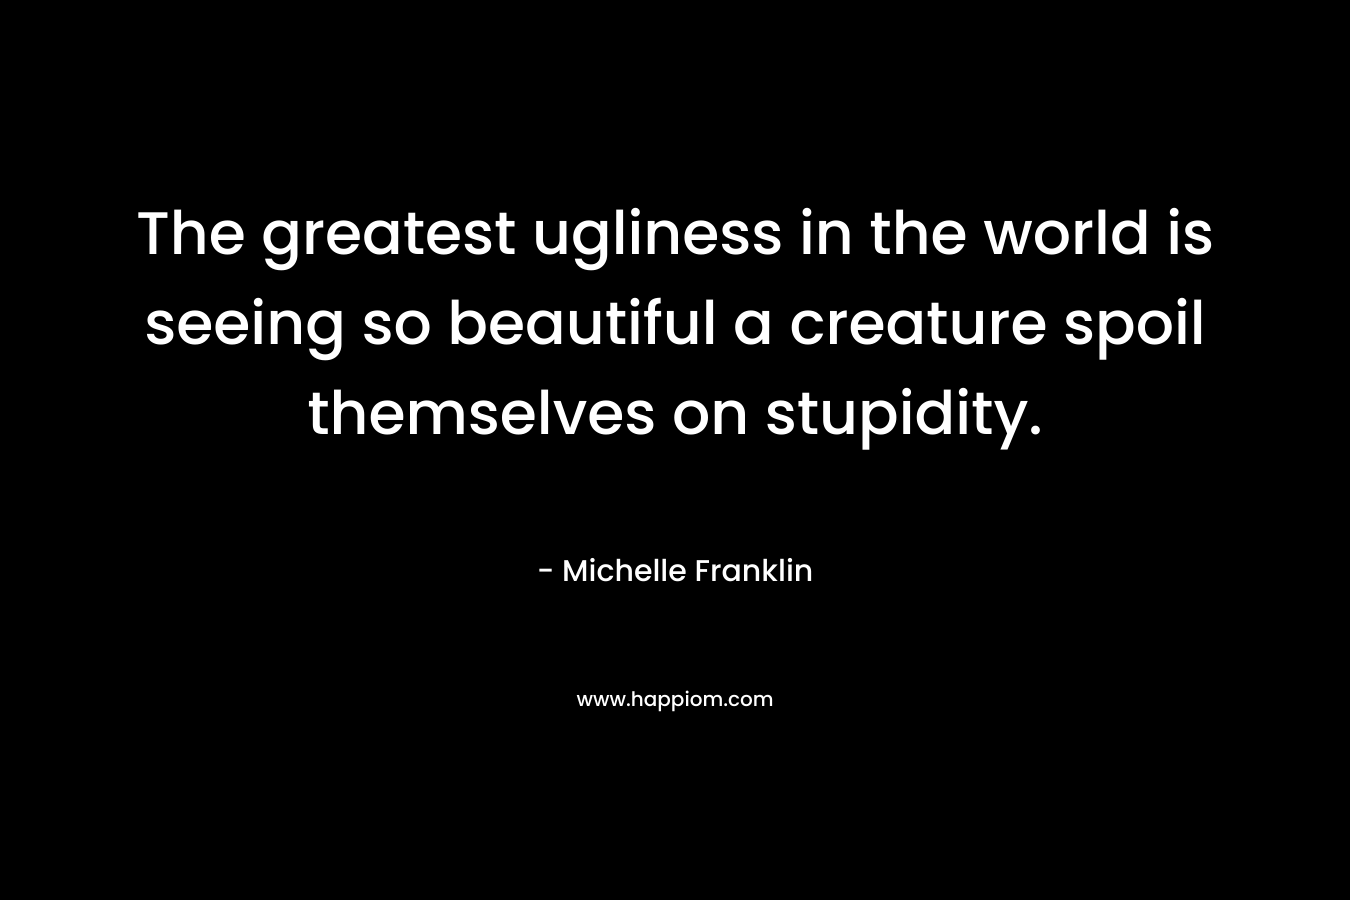 The greatest ugliness in the world is seeing so beautiful a creature spoil themselves on stupidity.